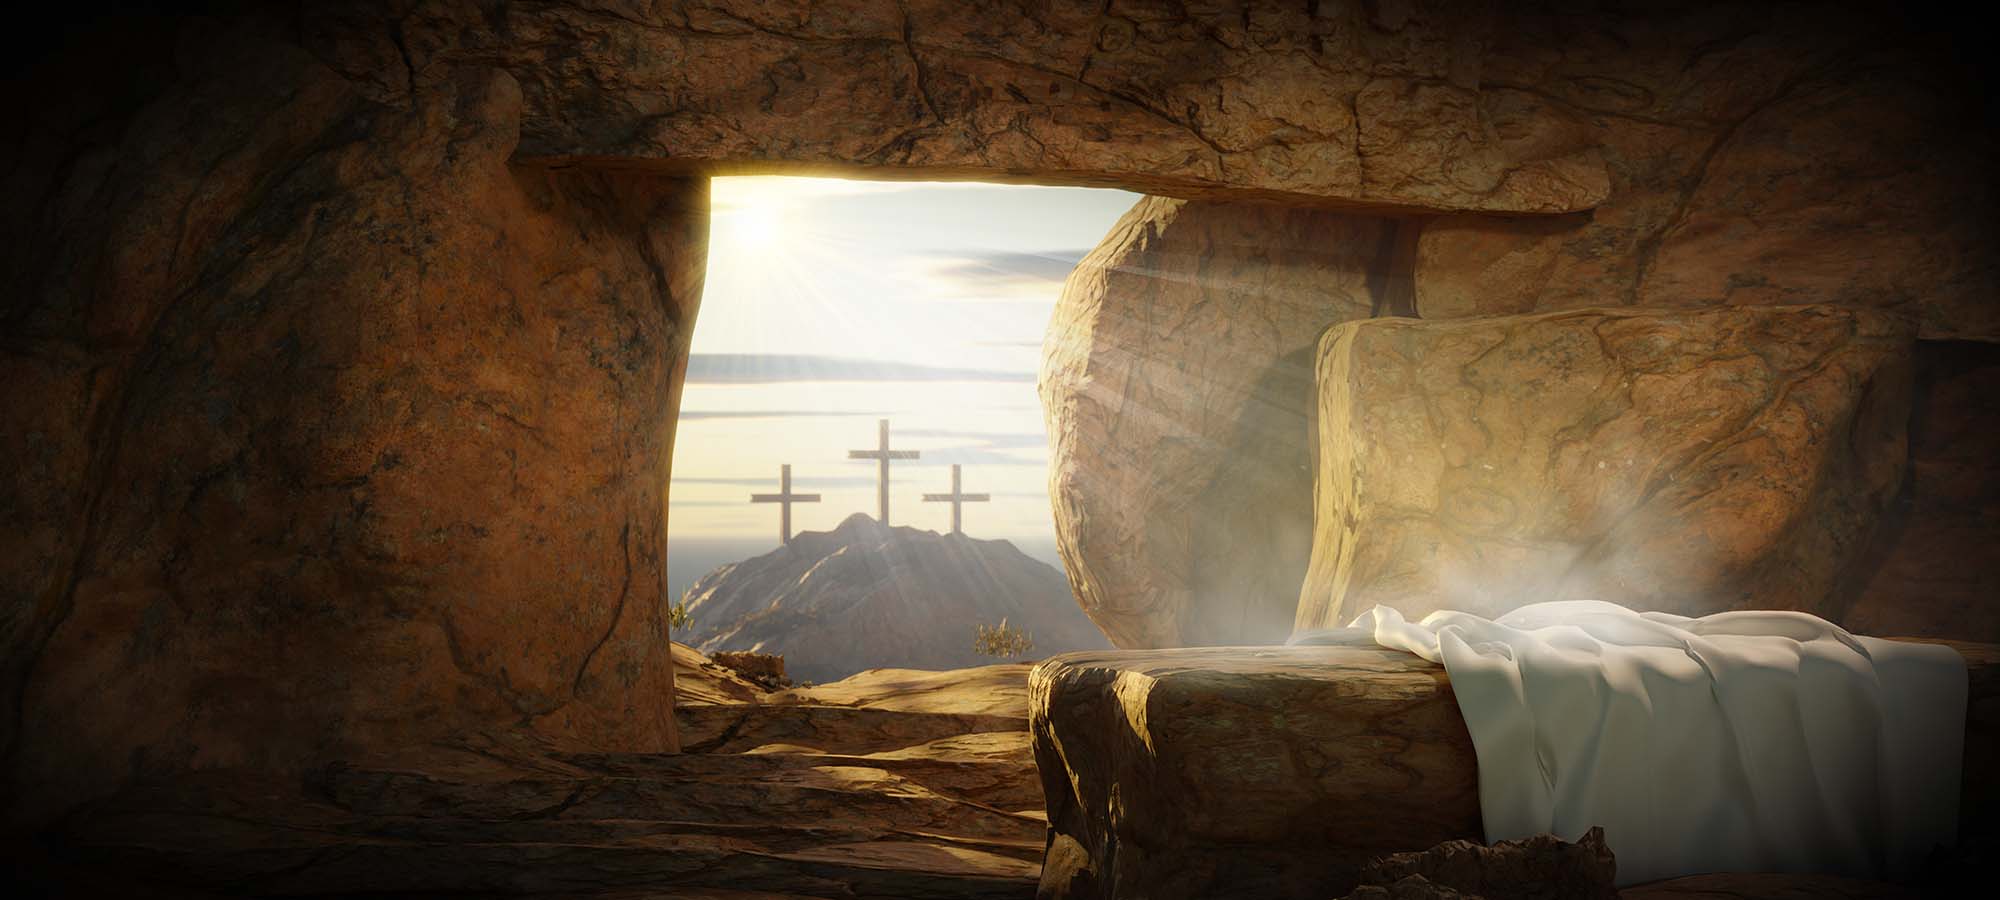 An image of the empty tomb with three crosses on a hill in the distance.